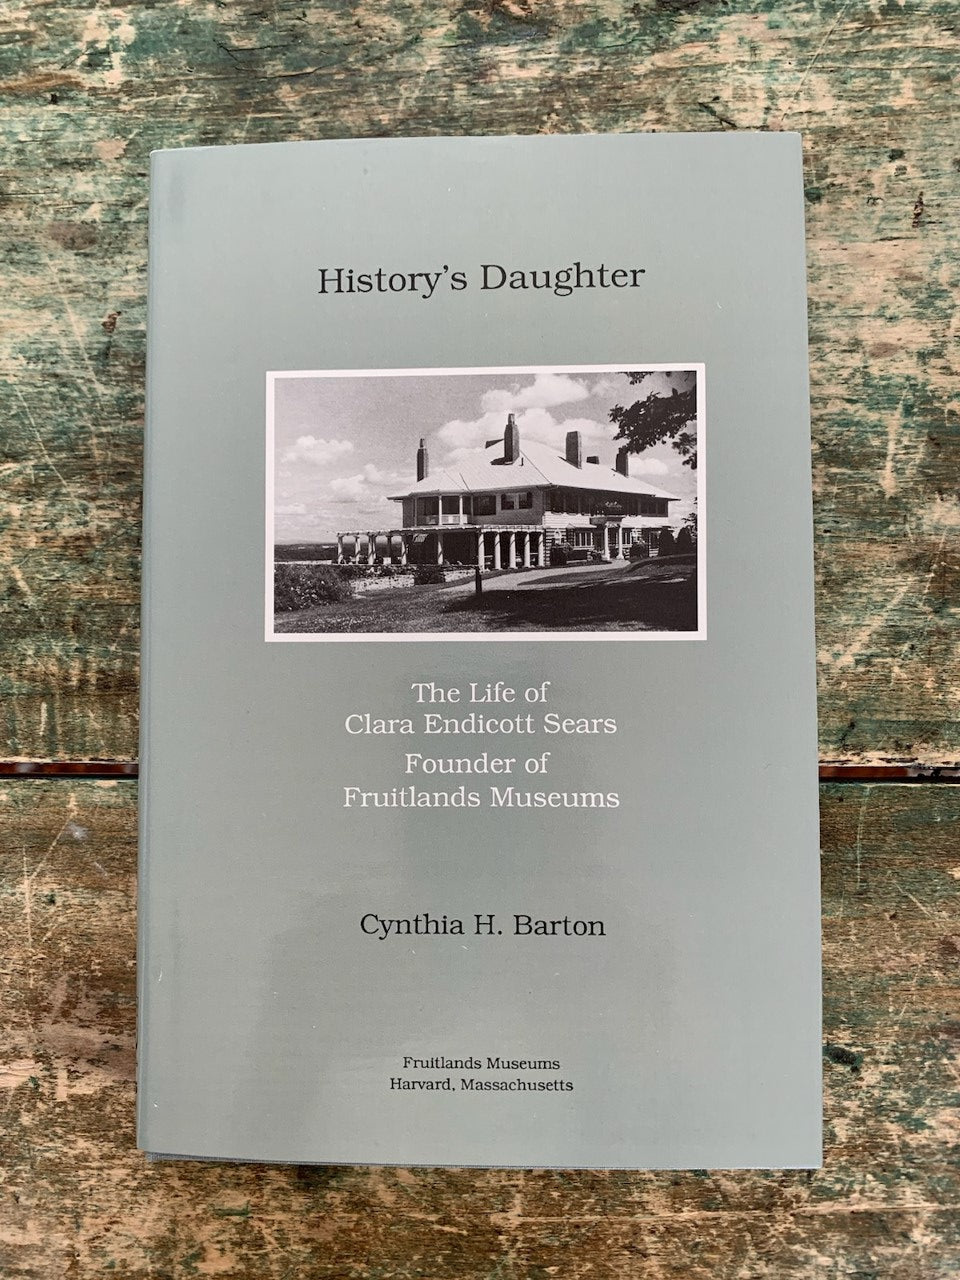 History's Daughter: The Life of Clara Endicott Sears